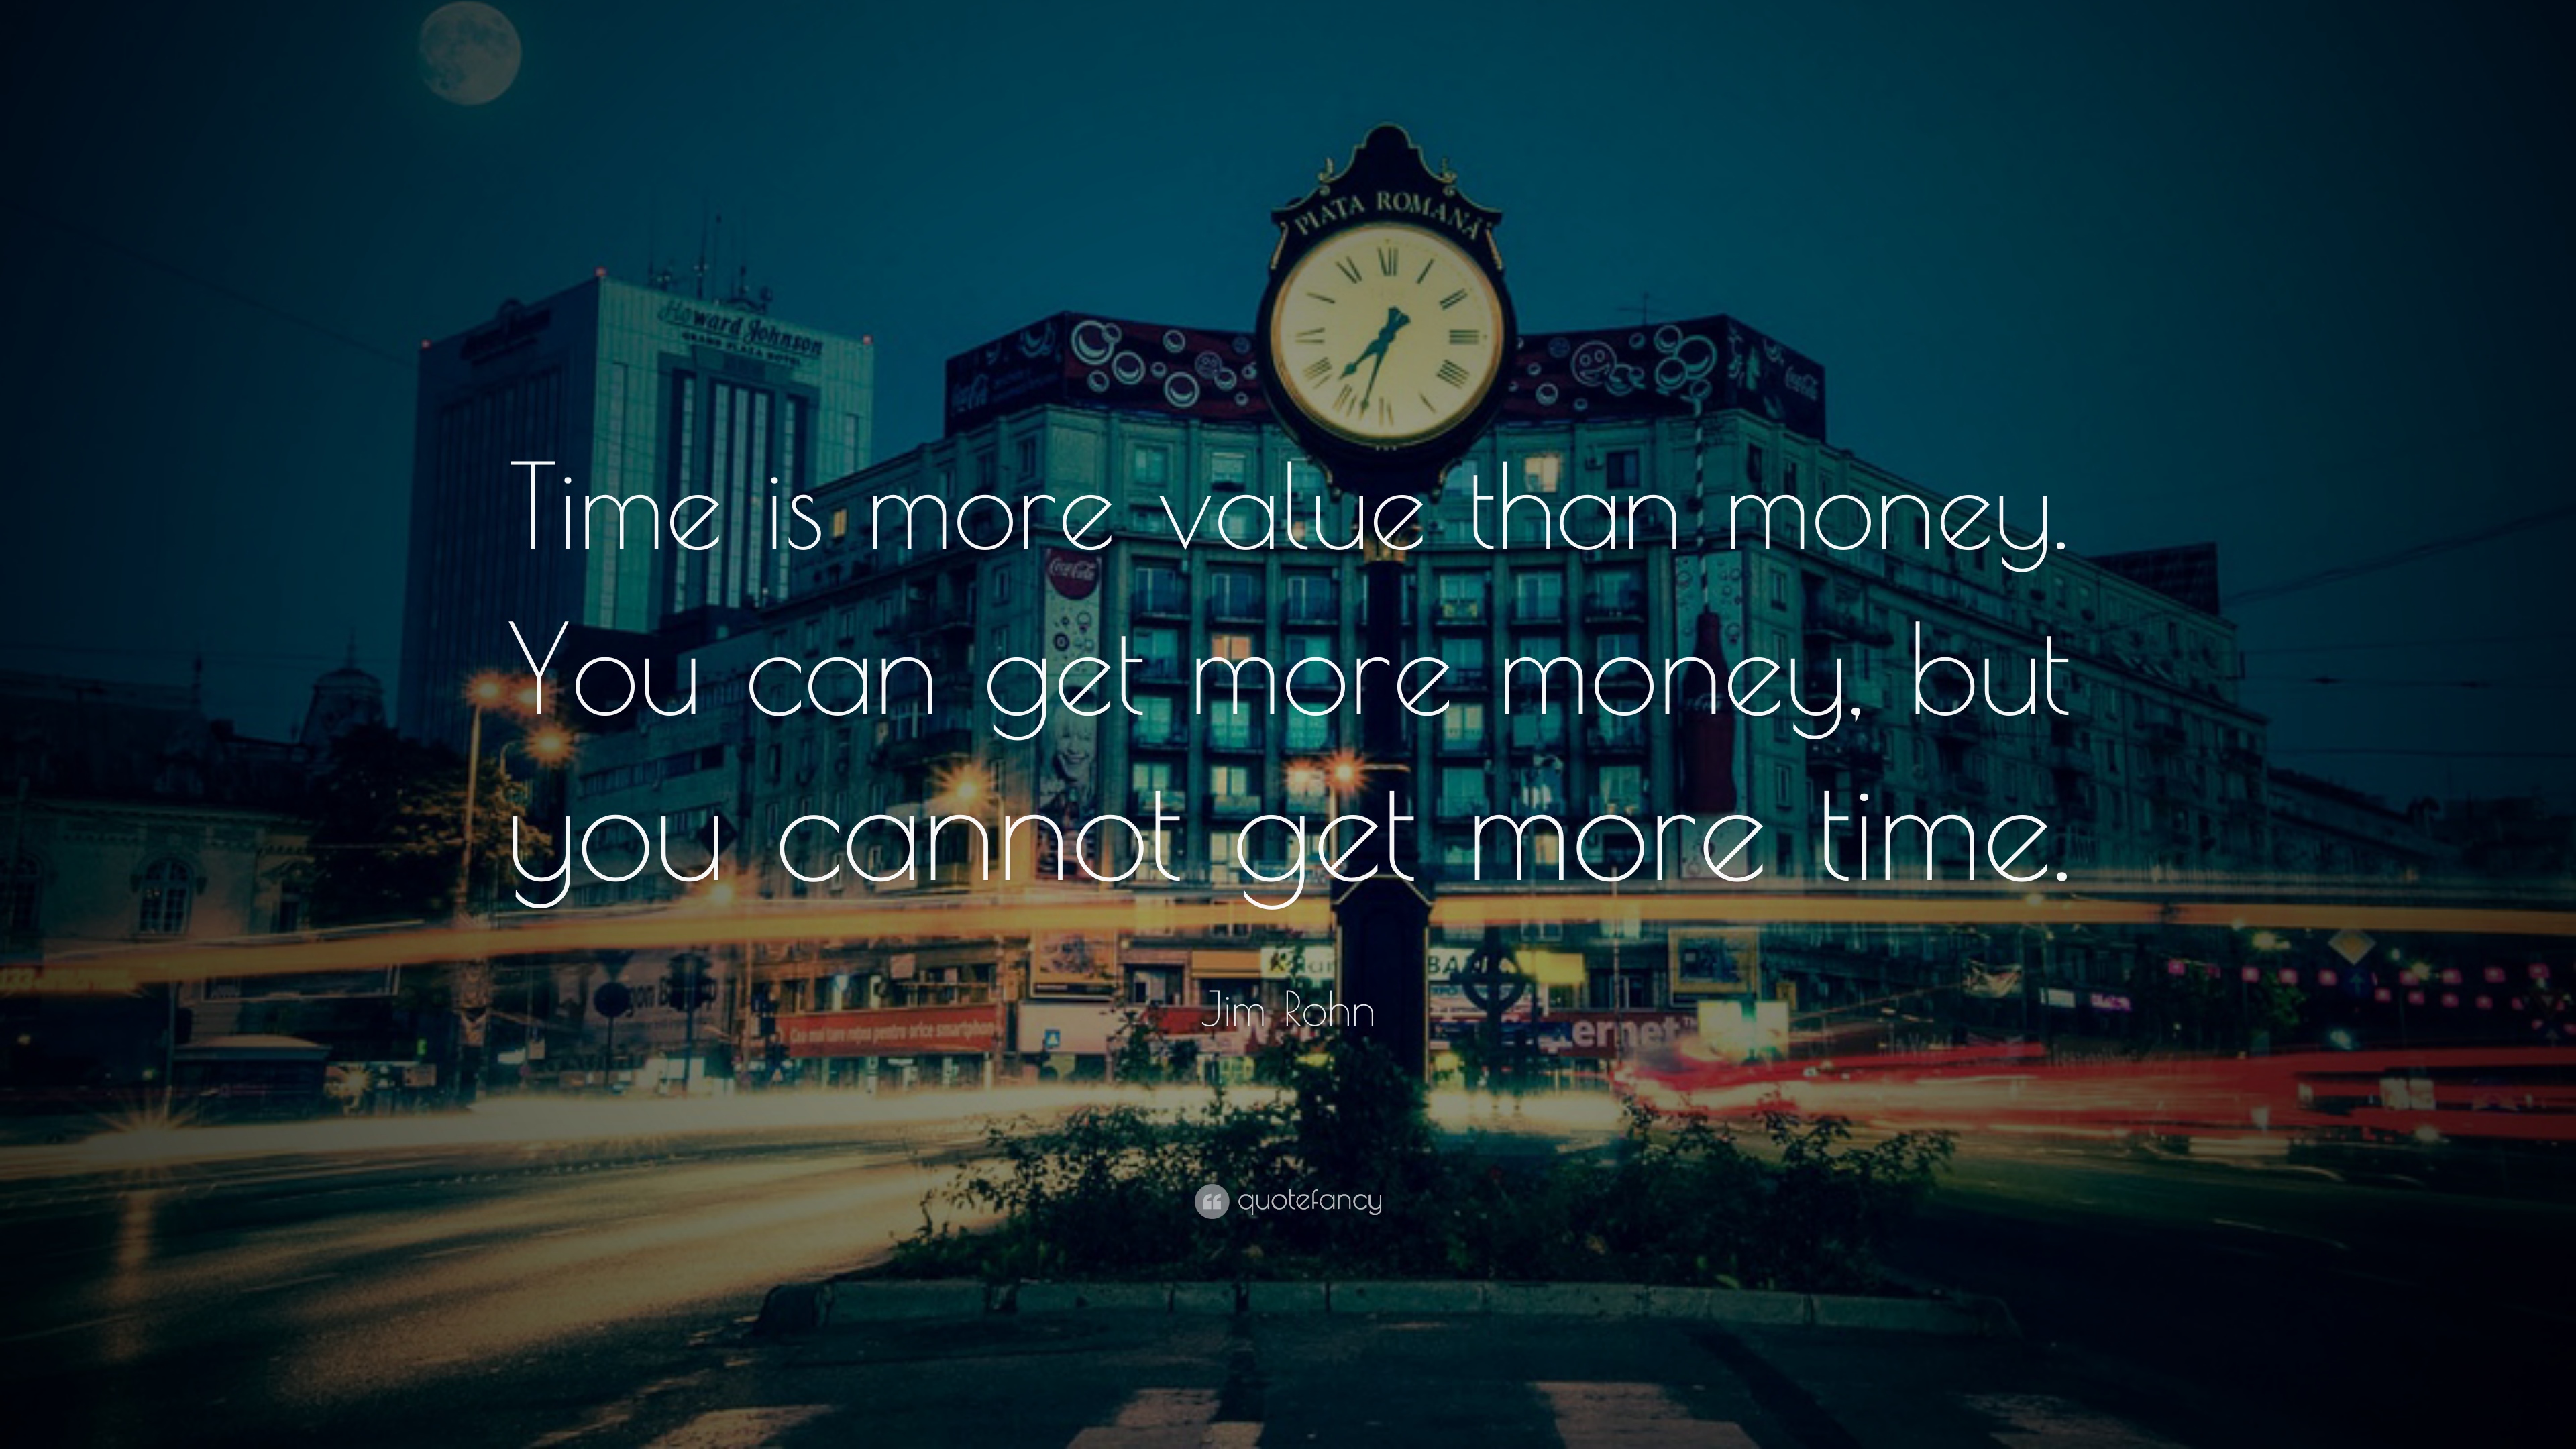 15220-Jim-Rohn-Quote-Time-is-more-value-than-money-You-can-get-more.jpg